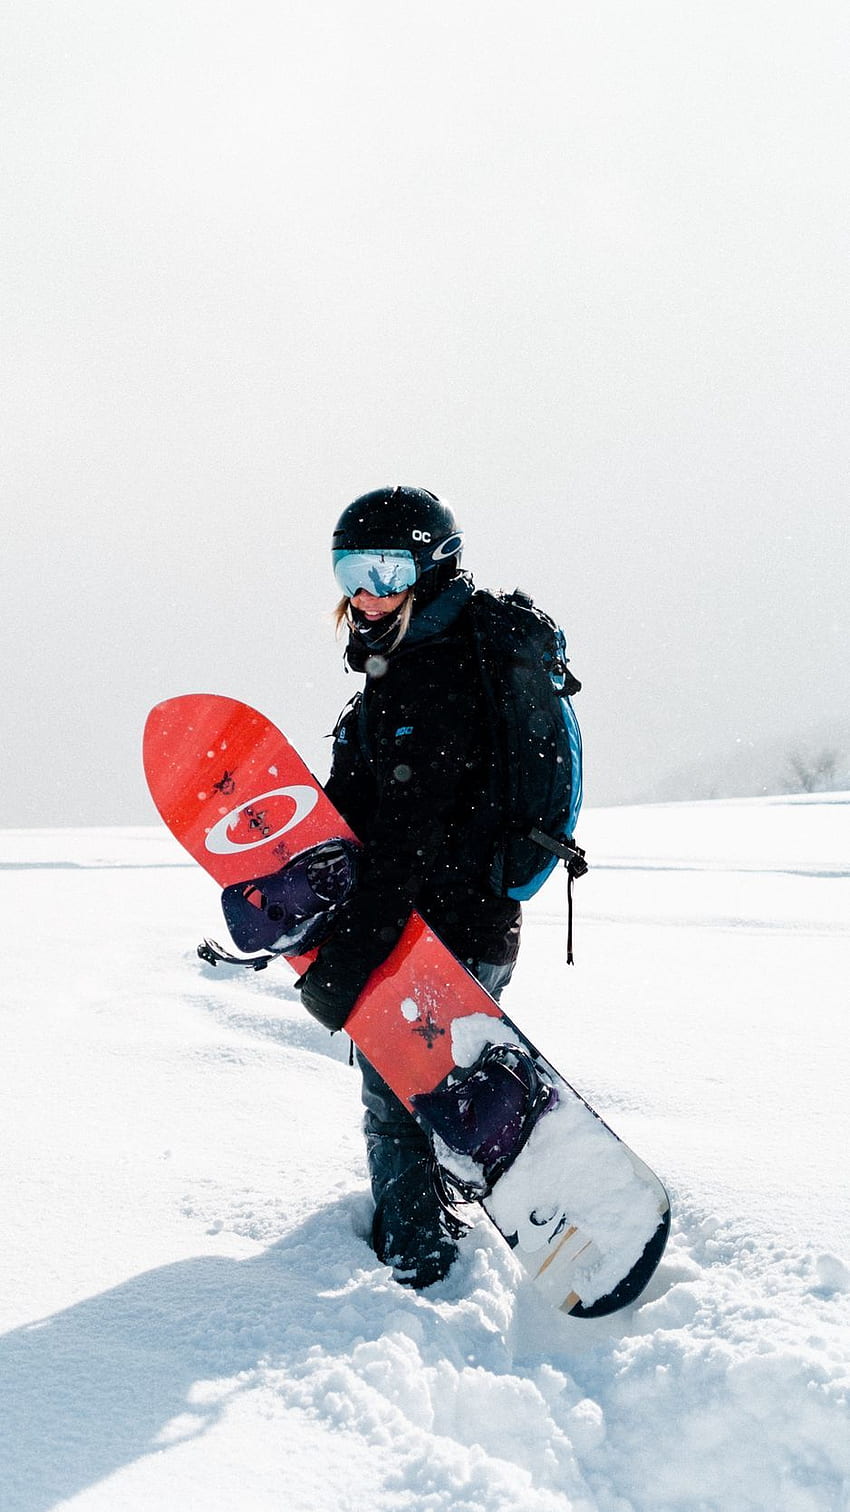 450 Snowboarding Pictures HQ  Download Free Images on Unsplash